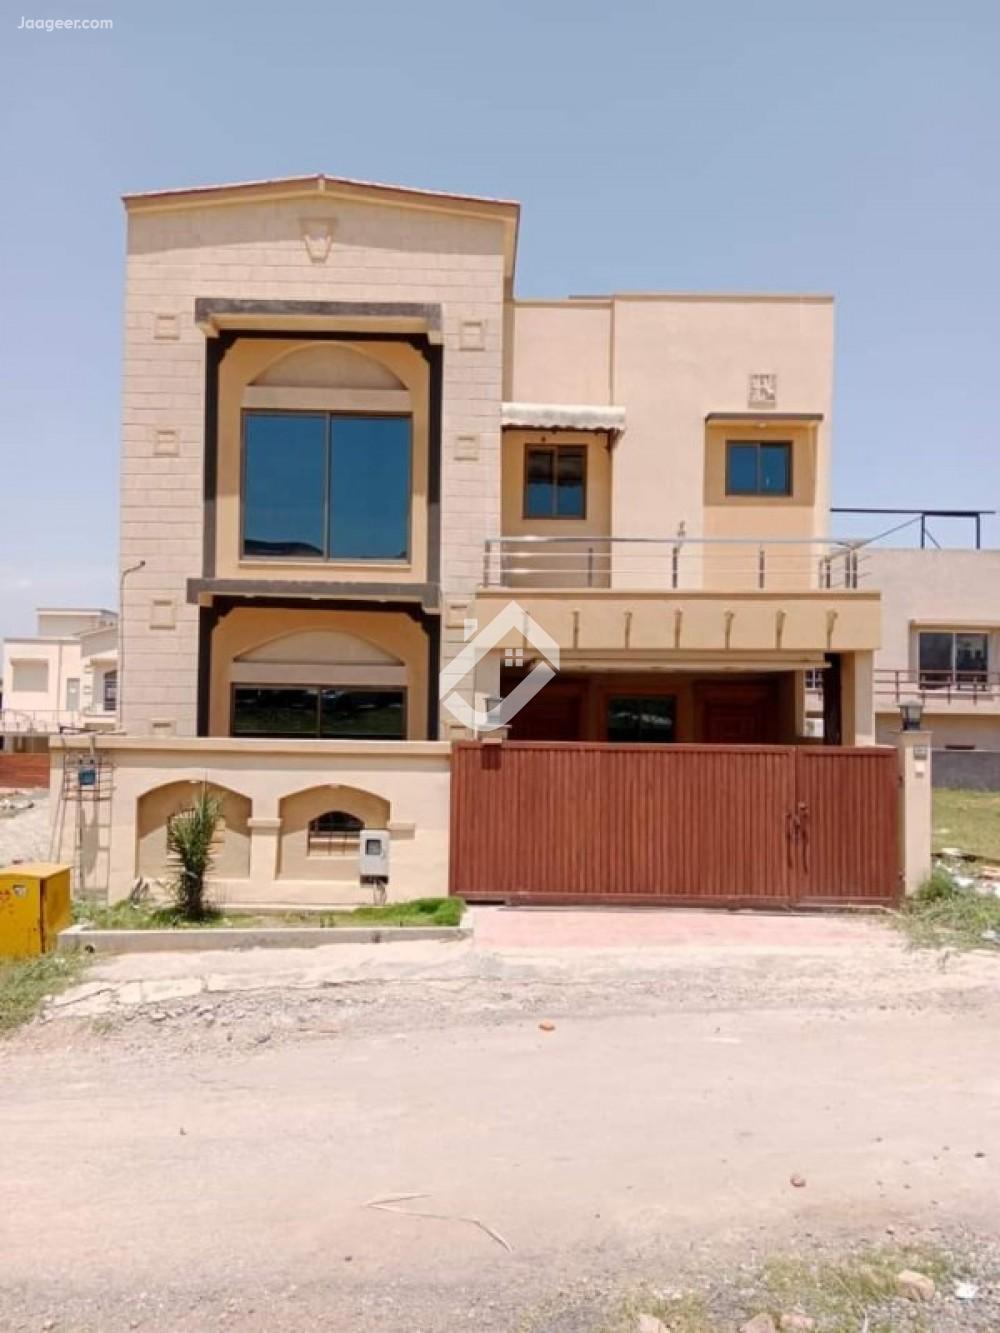 Main image 7 Marla House For Sale In Bahria Town Phase-8   Bahria Town Phase-8, Rawalpindi